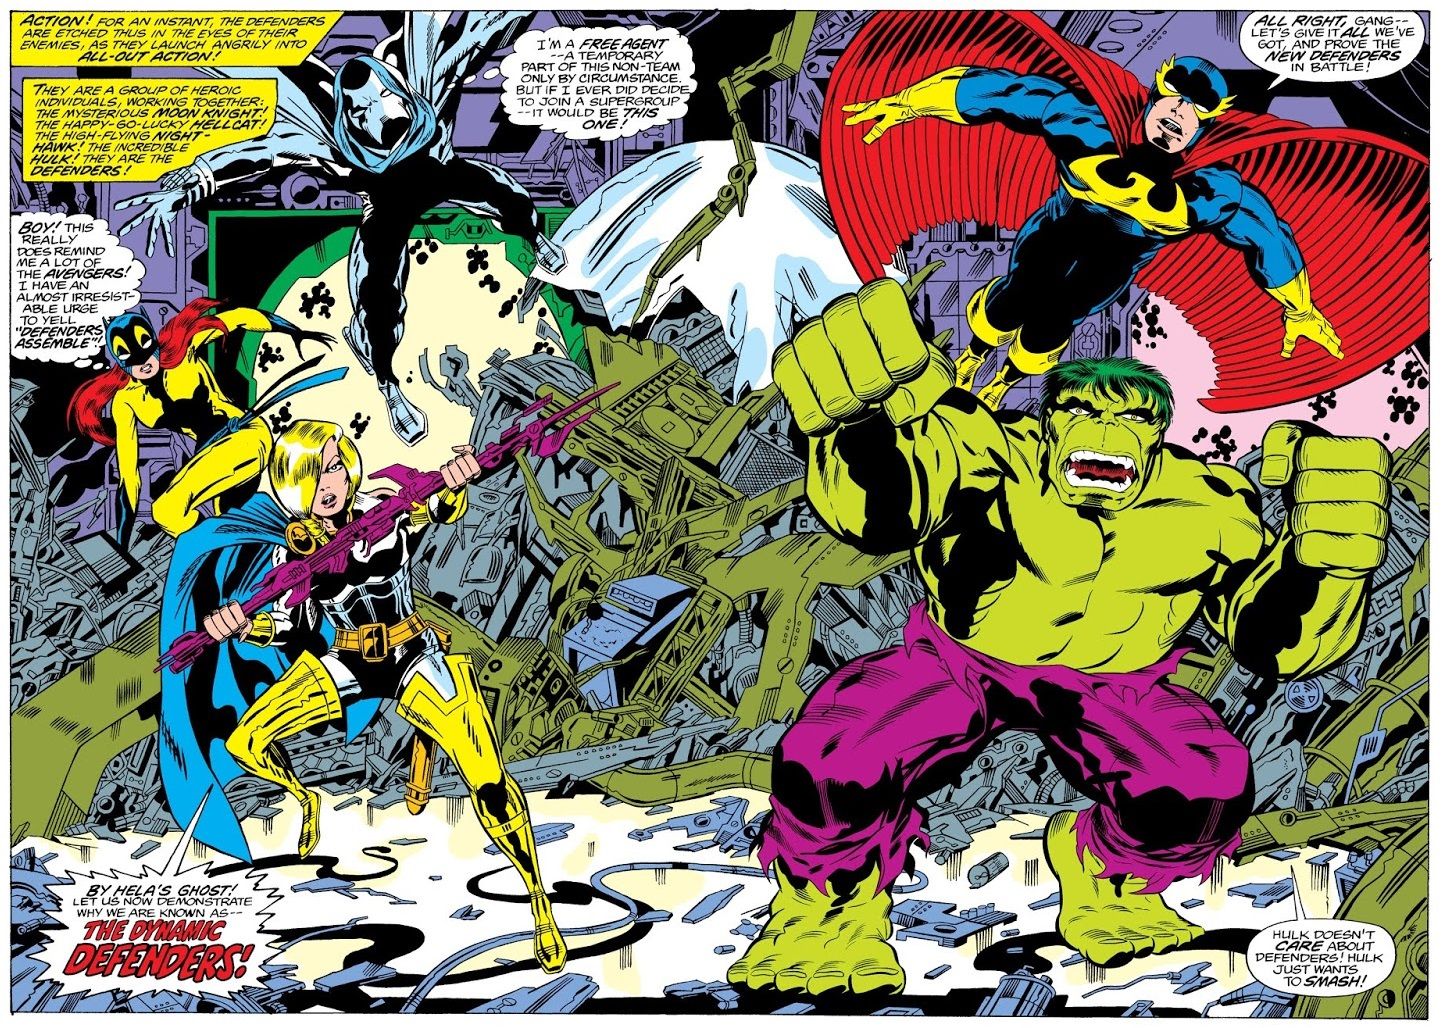 Keith Giffen draws the Defenders in action